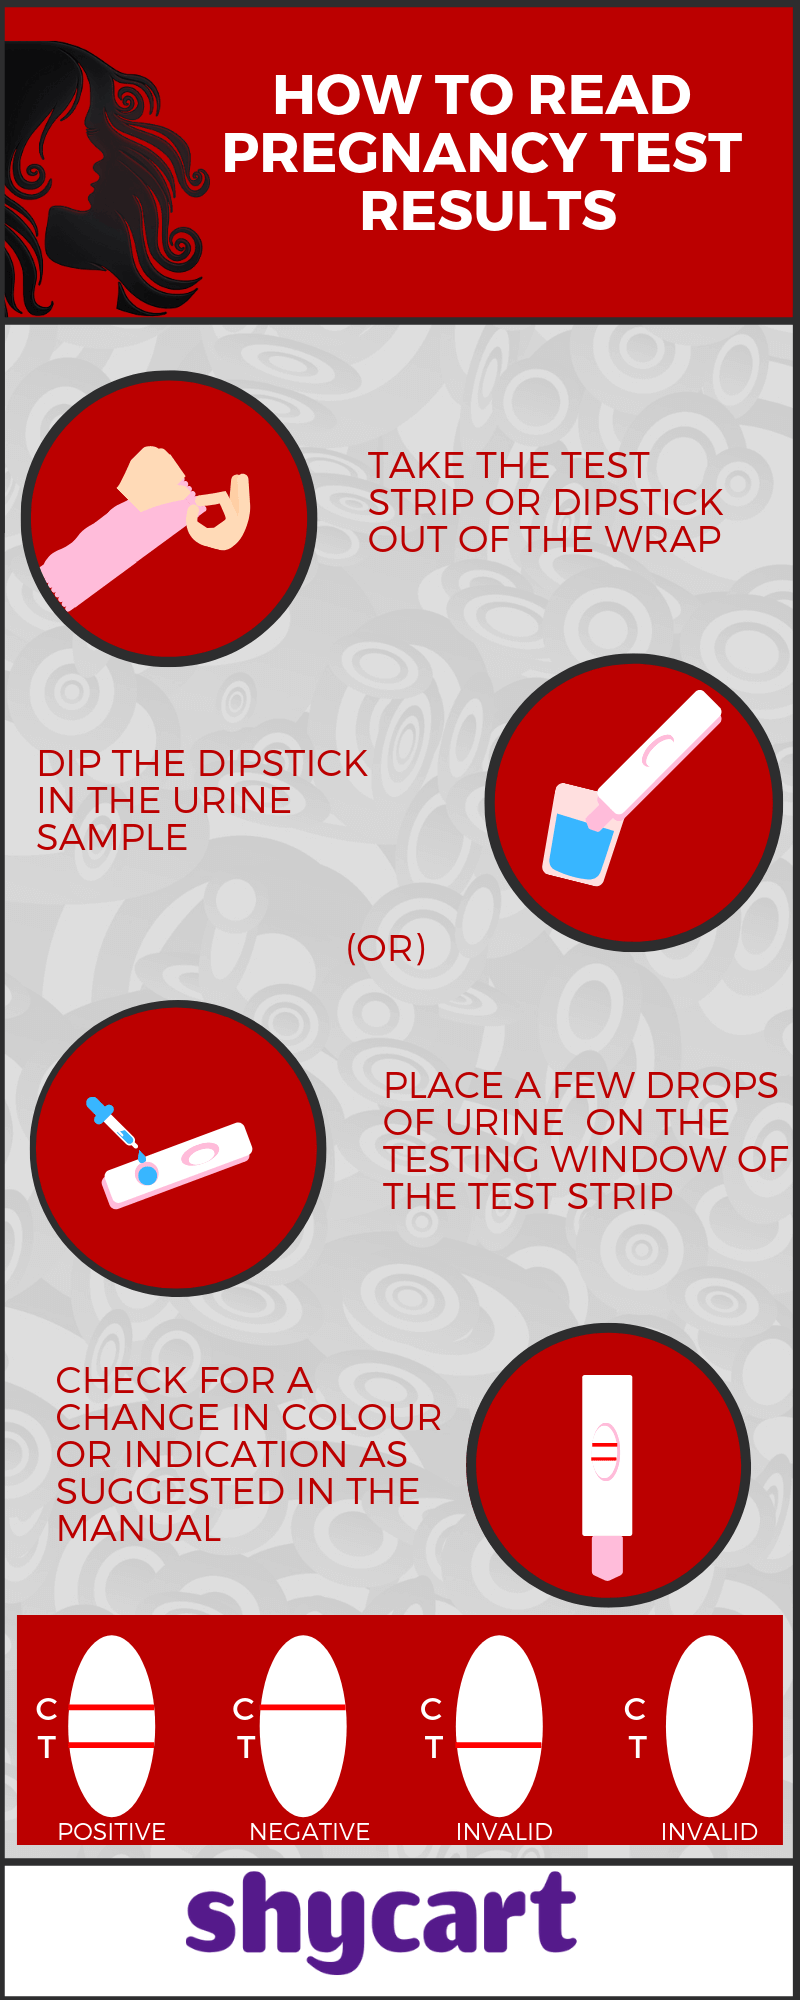 Infographic explaining - how to read / interpret the pregnancy test result